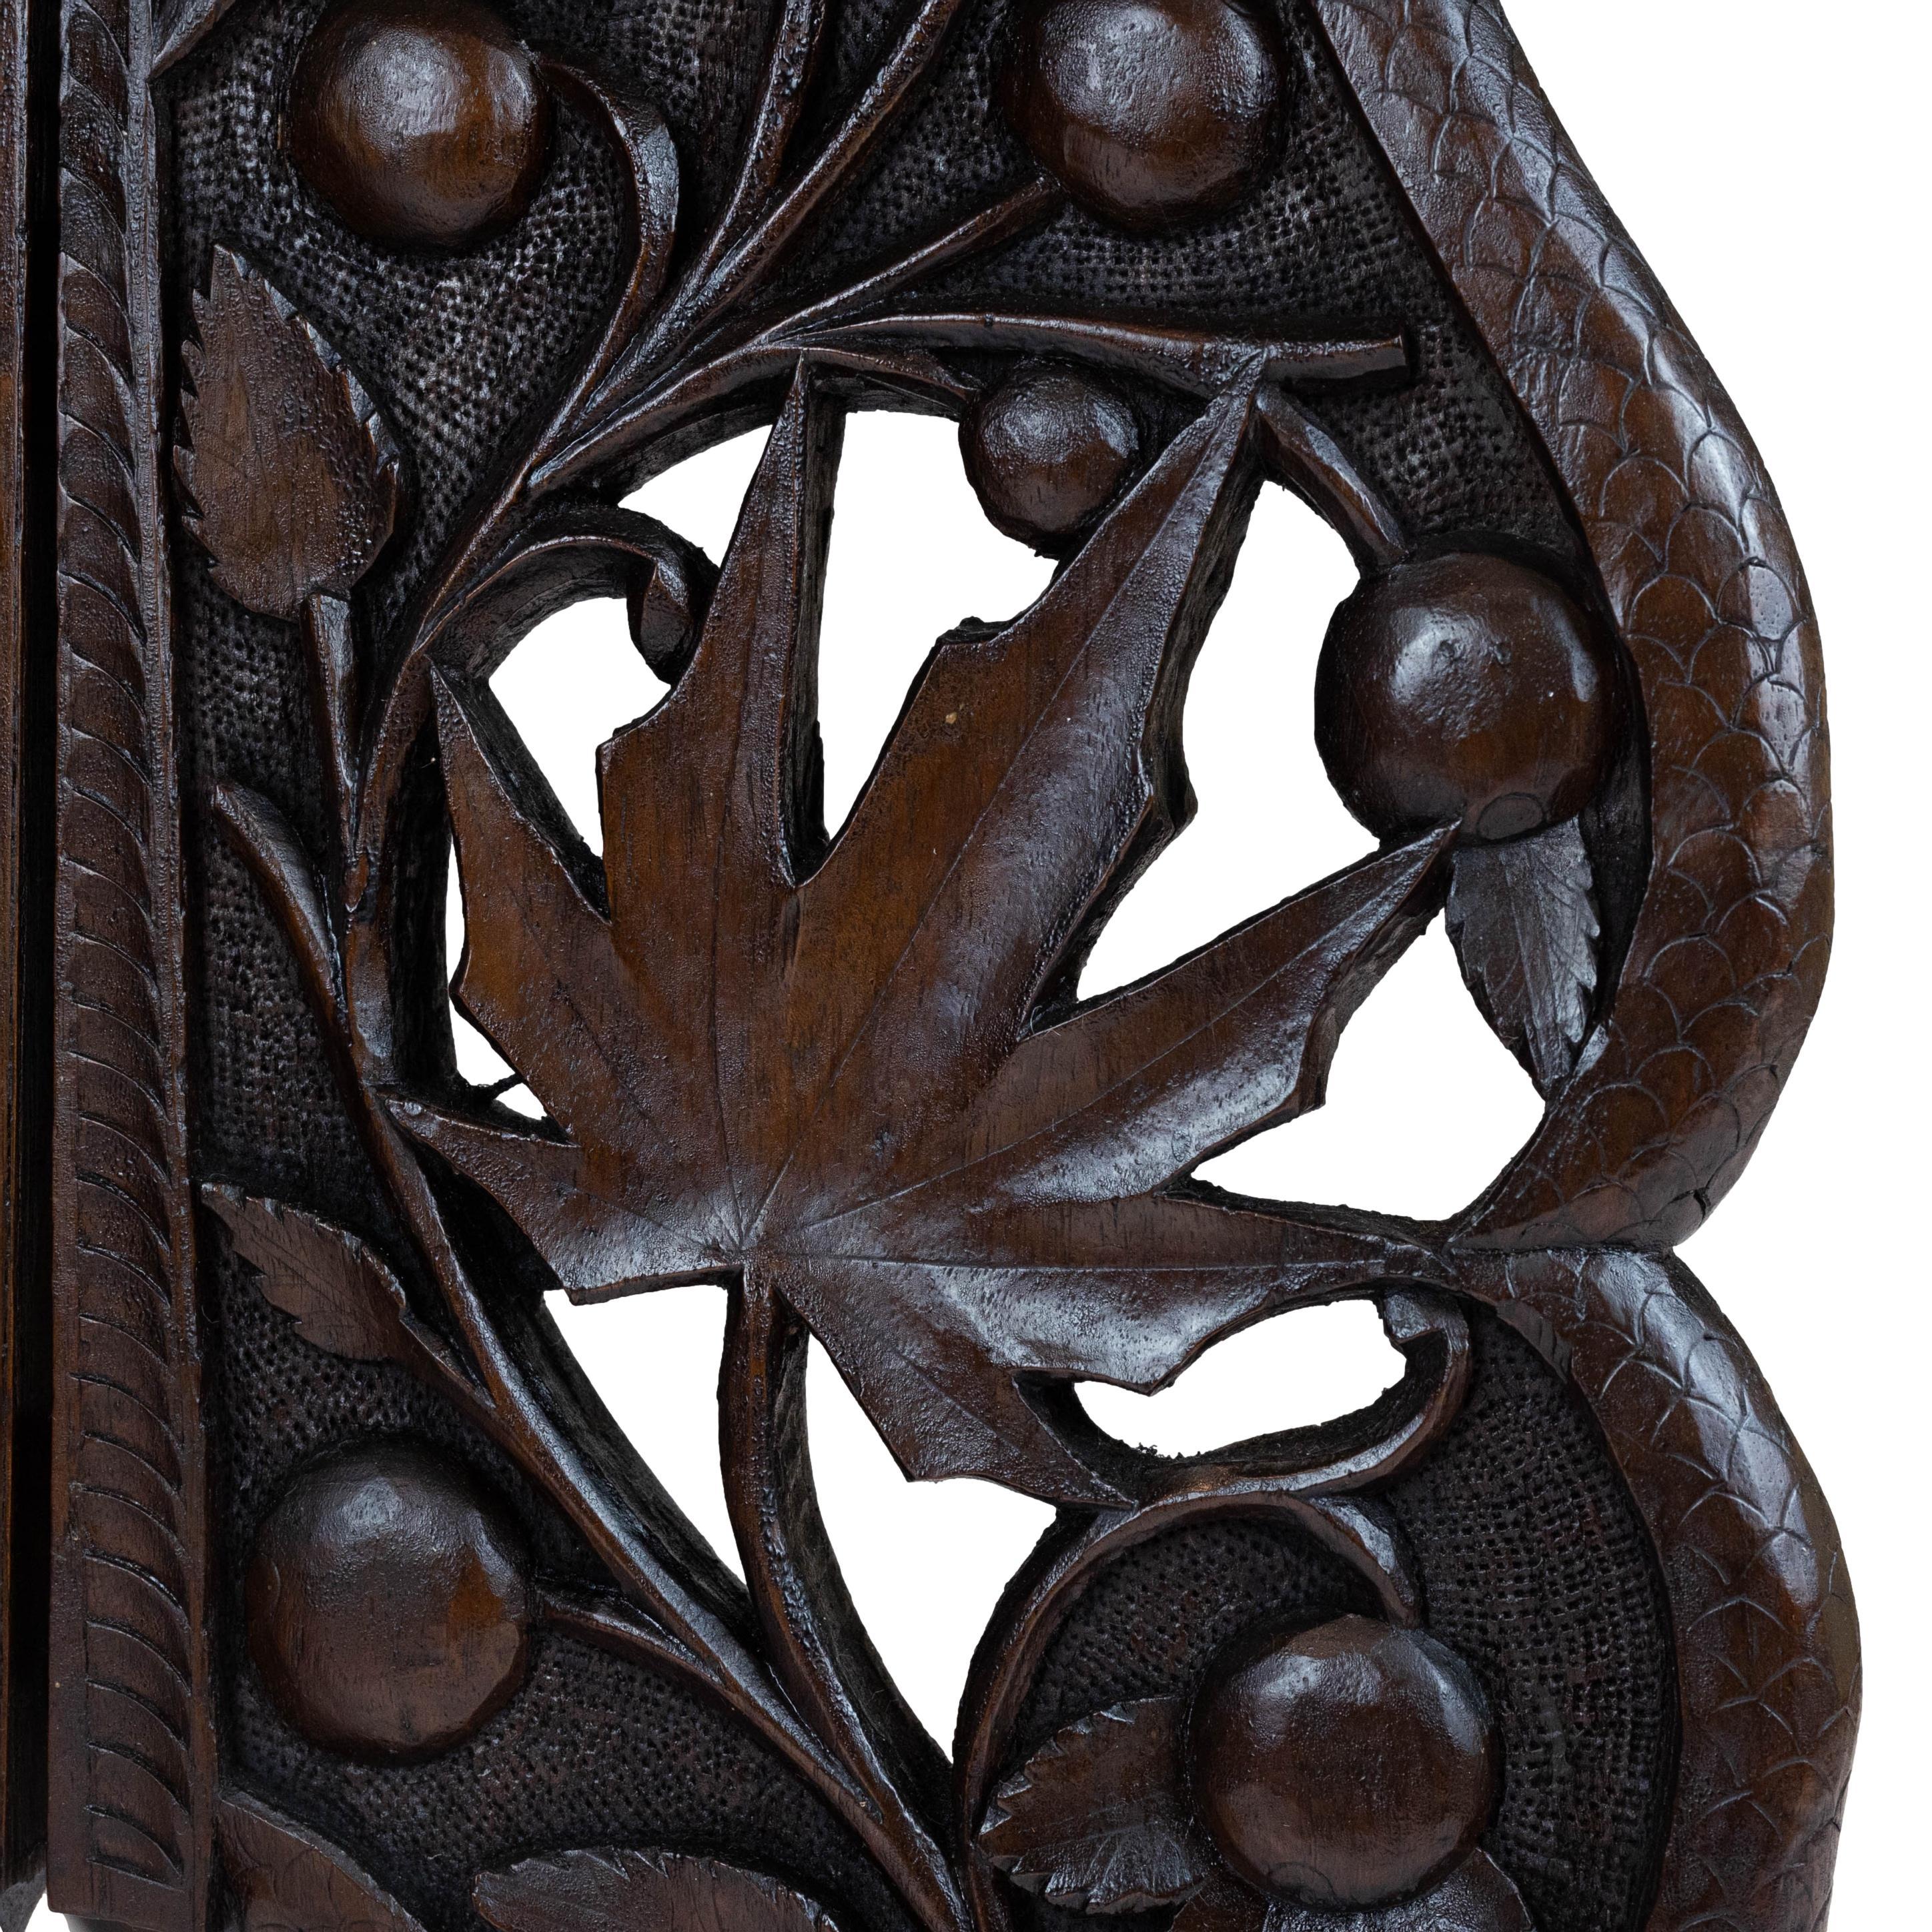 Elaborately Hand-Carved Solid Walnut Campaign Tray-Top Table, English, ca. 1890 For Sale 3